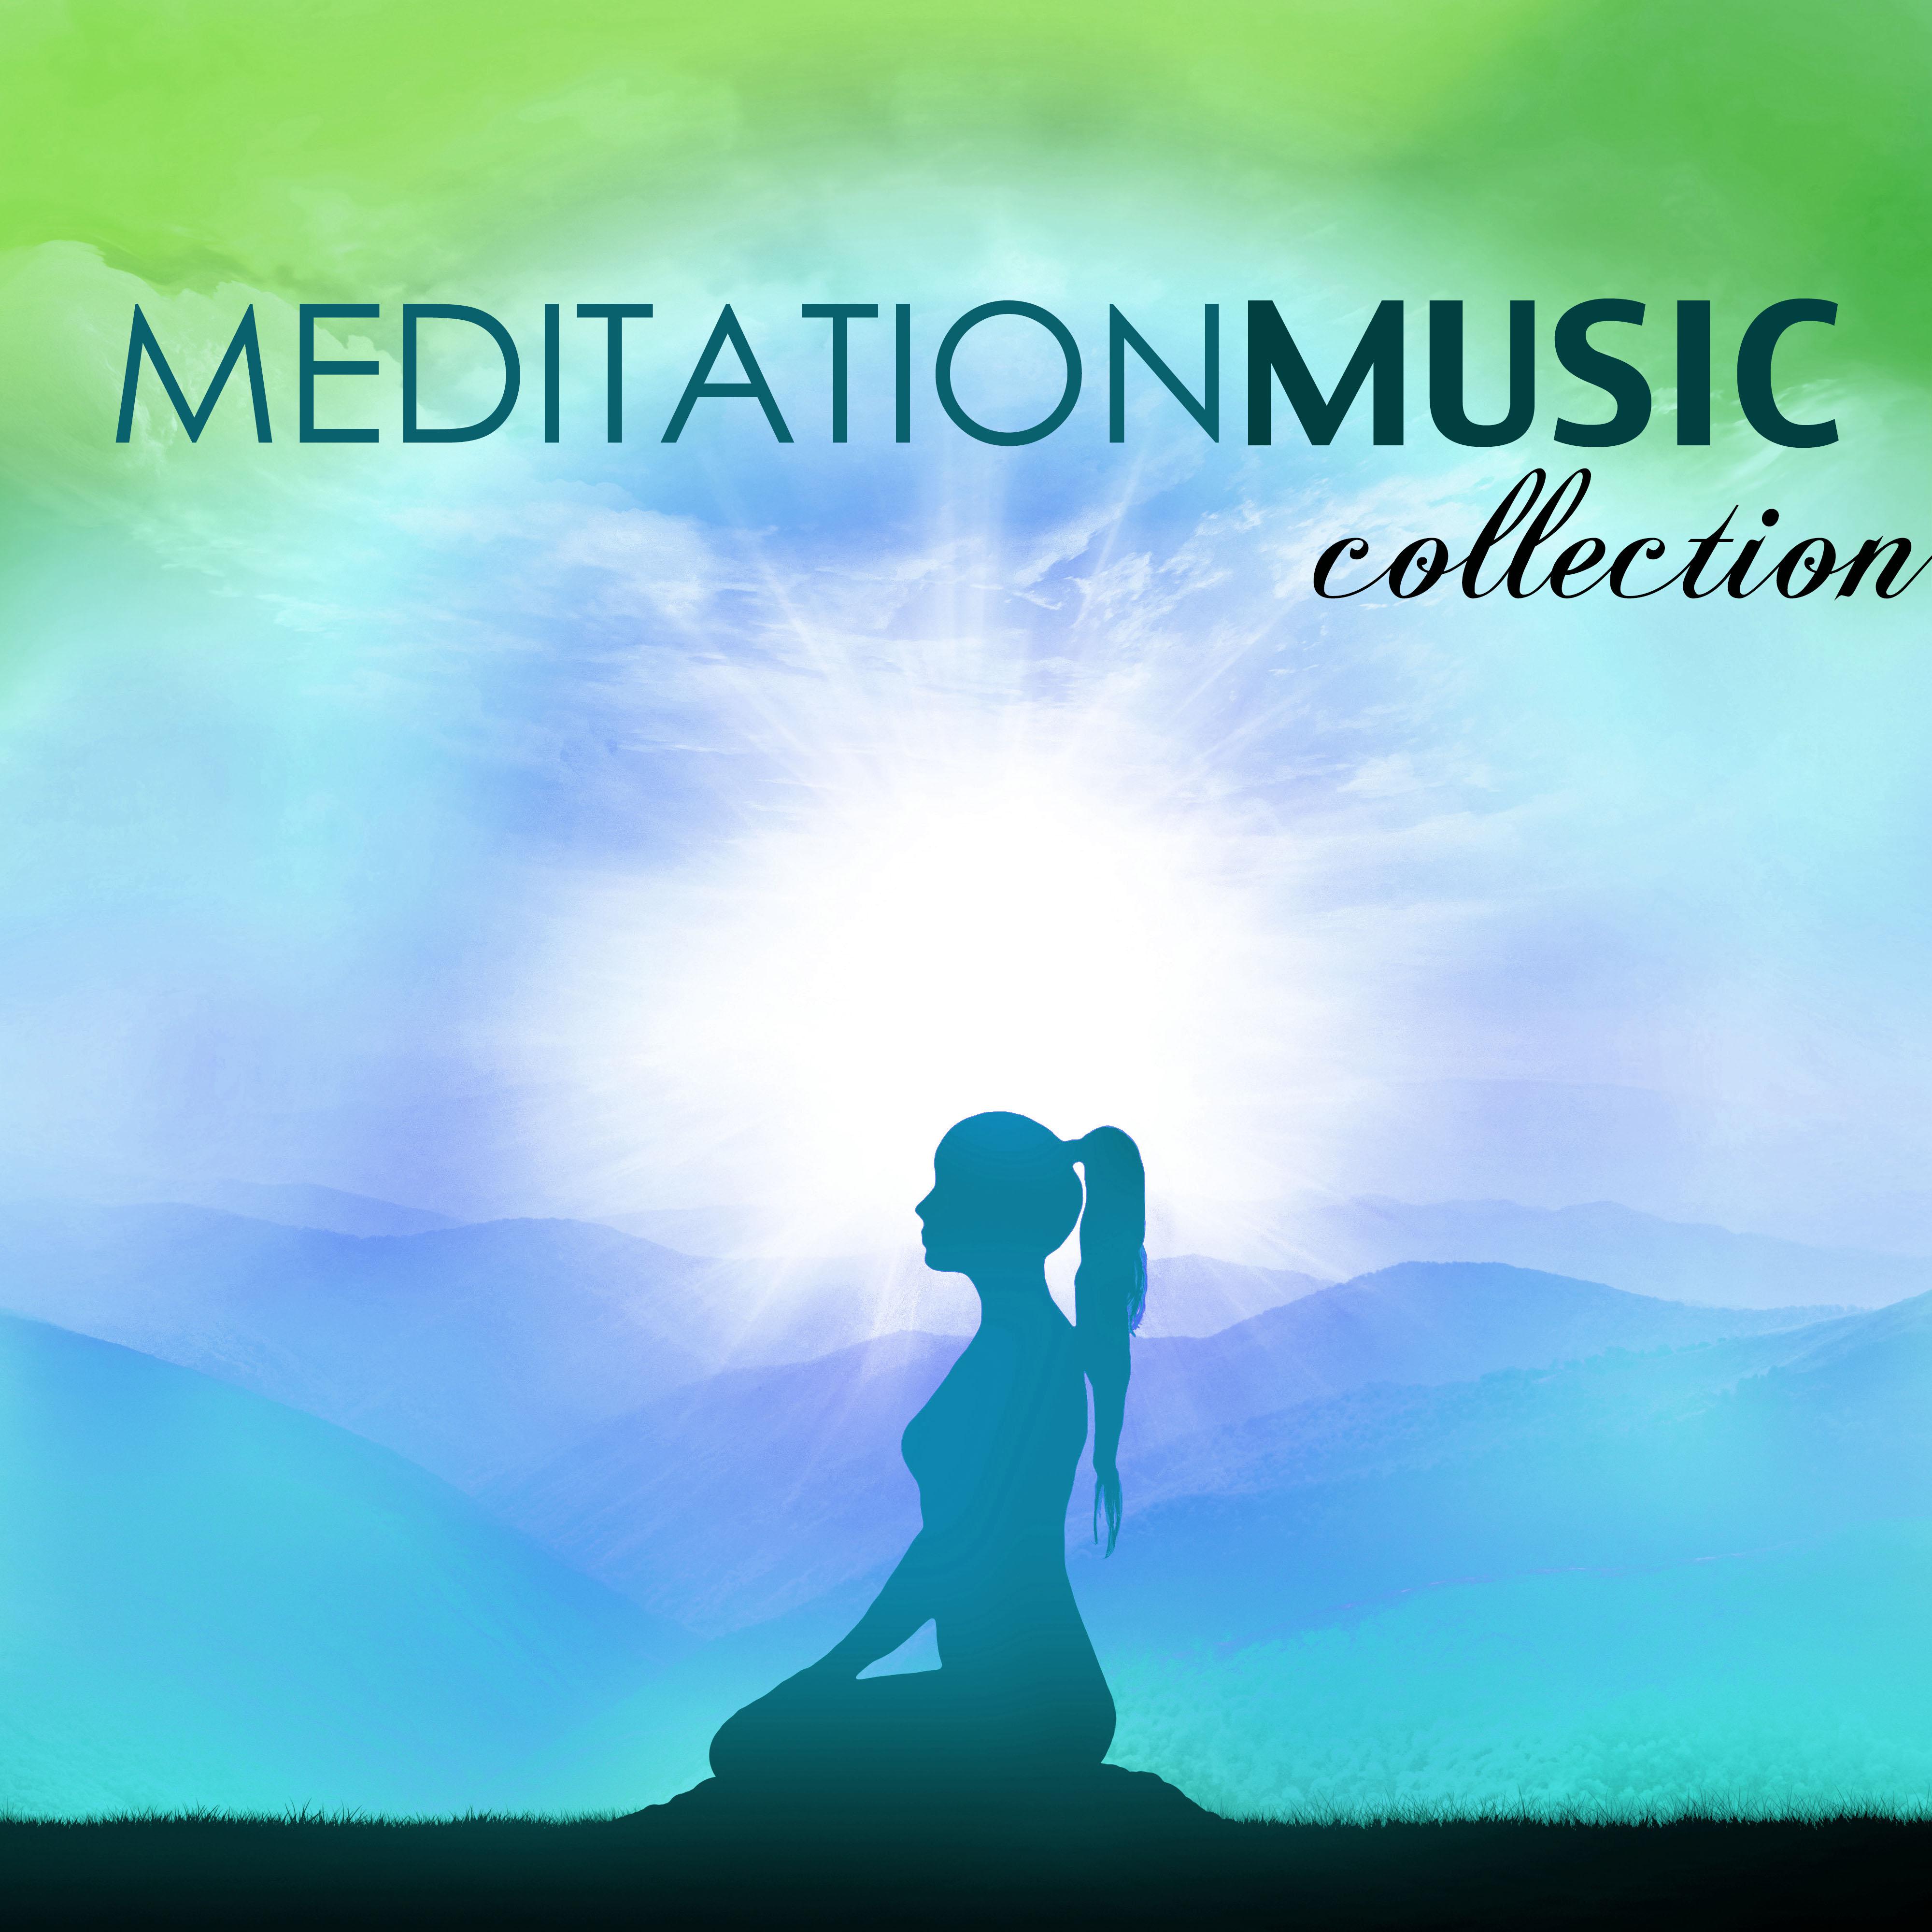 Meditation Music Collection - Oasis of Zen Relaxation for Mindful Meditations, Yoga and Massage Therapy